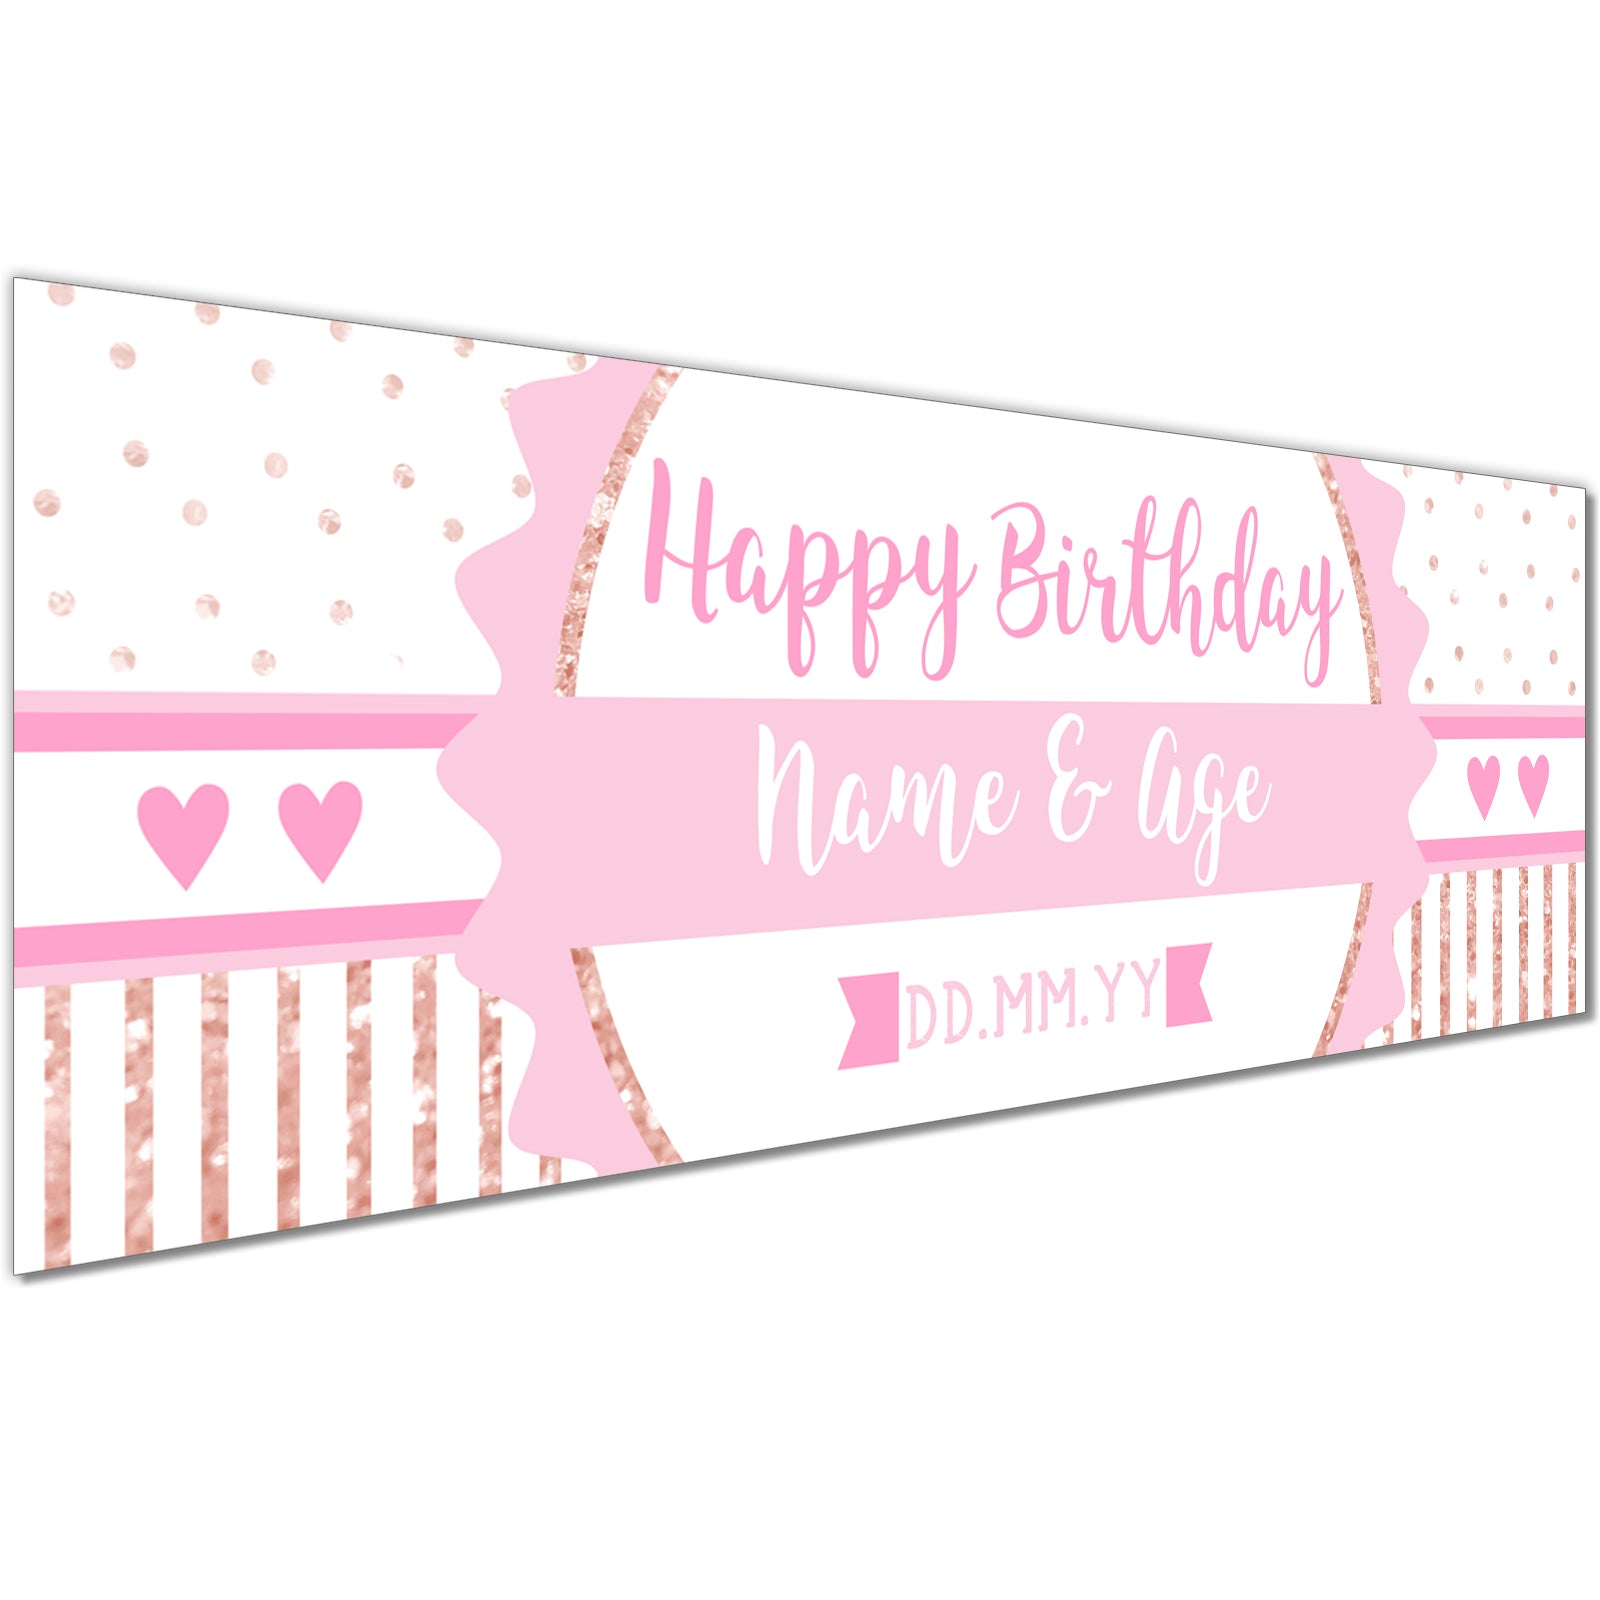 Kids Birthday Banners With Name in Pink Design